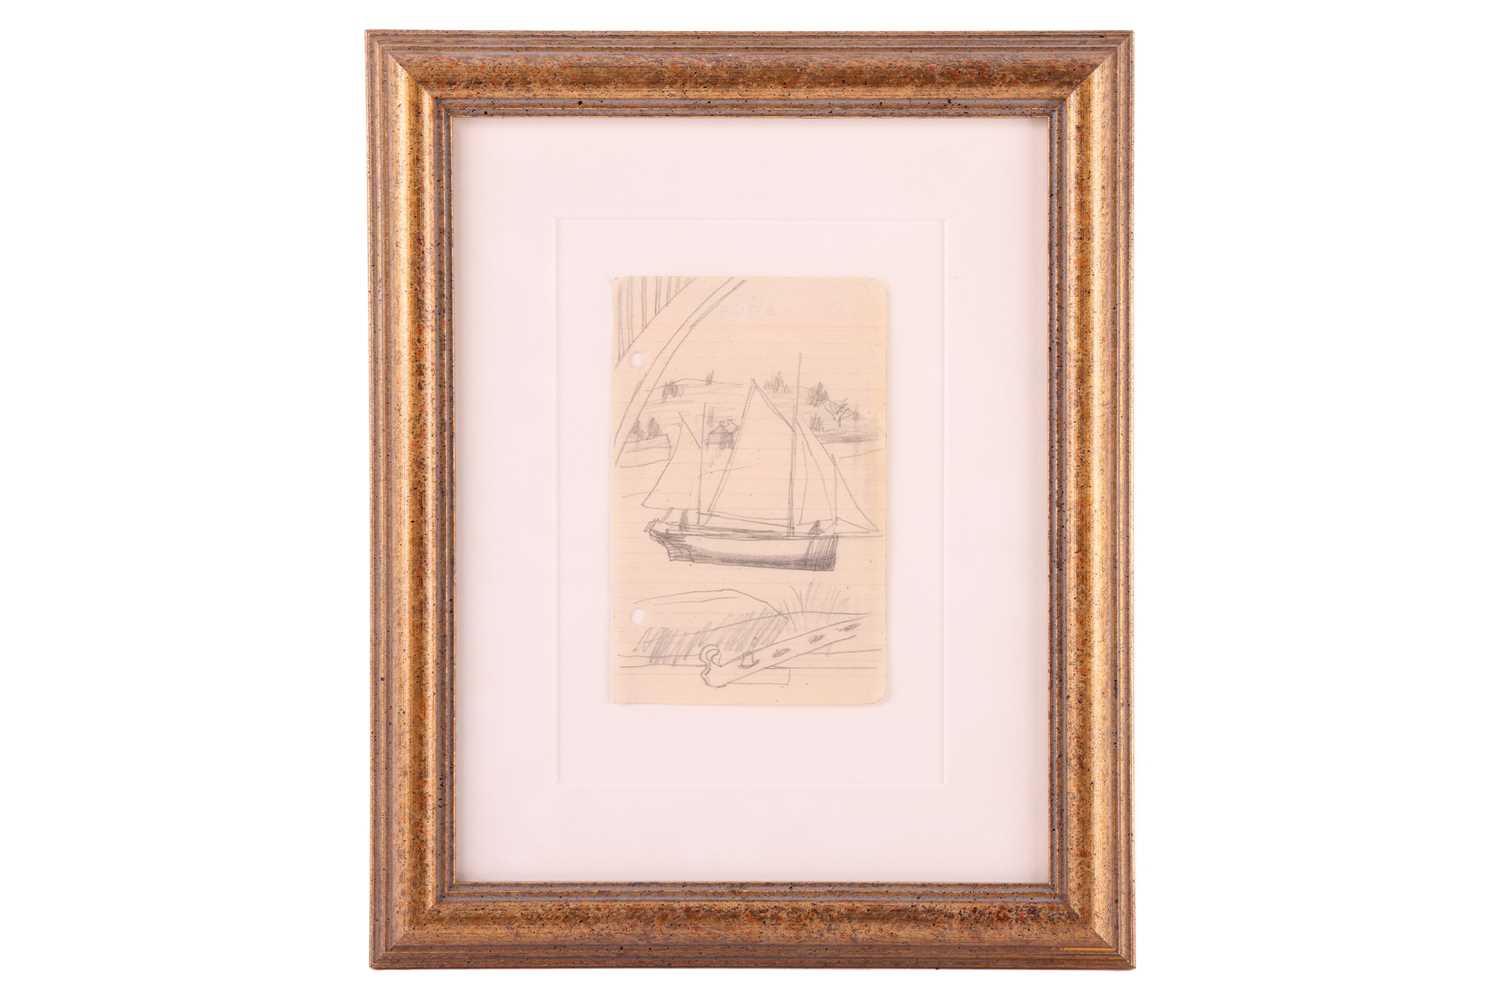 Ben Nicholson (1894-1982), Sailing boat through a window, Isle of Wight, unsigned, pencil on notepap